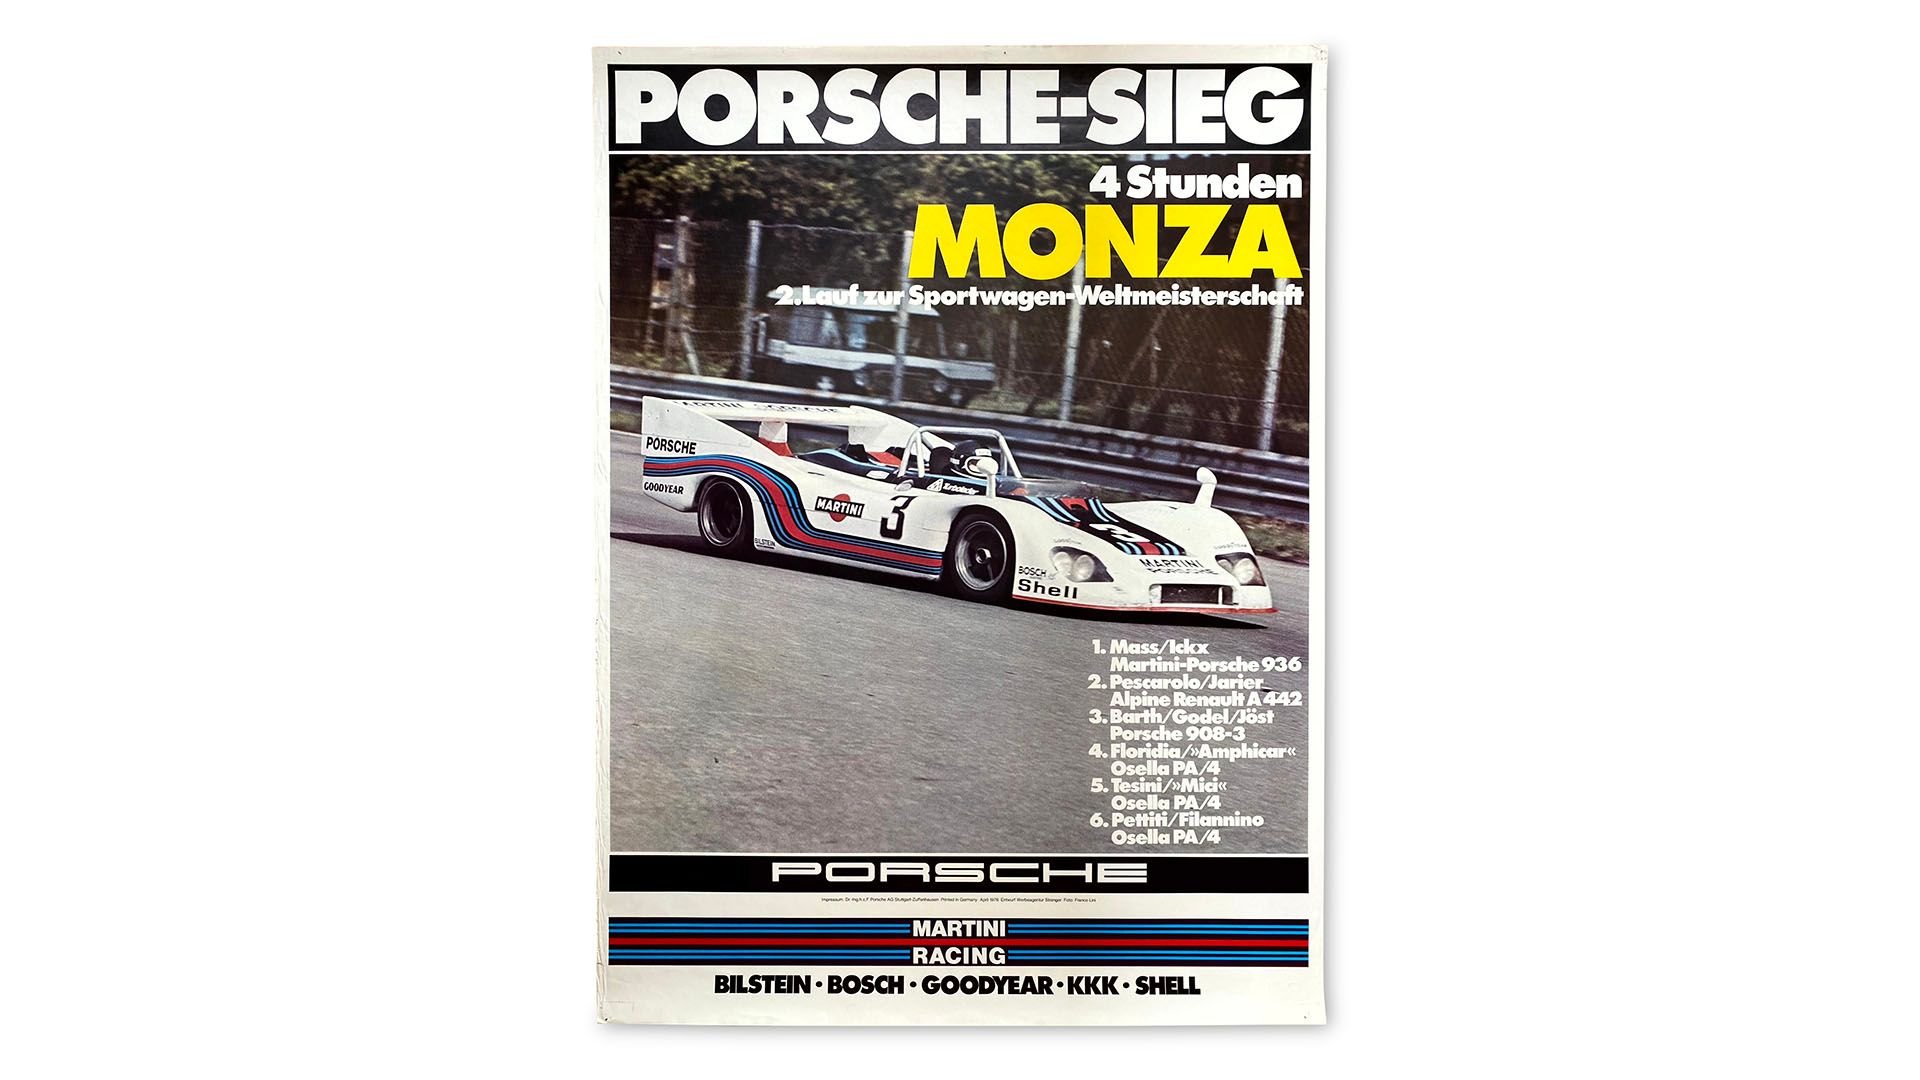 Group of 10 martini porsche 935 and 936 factory racing posters 1976